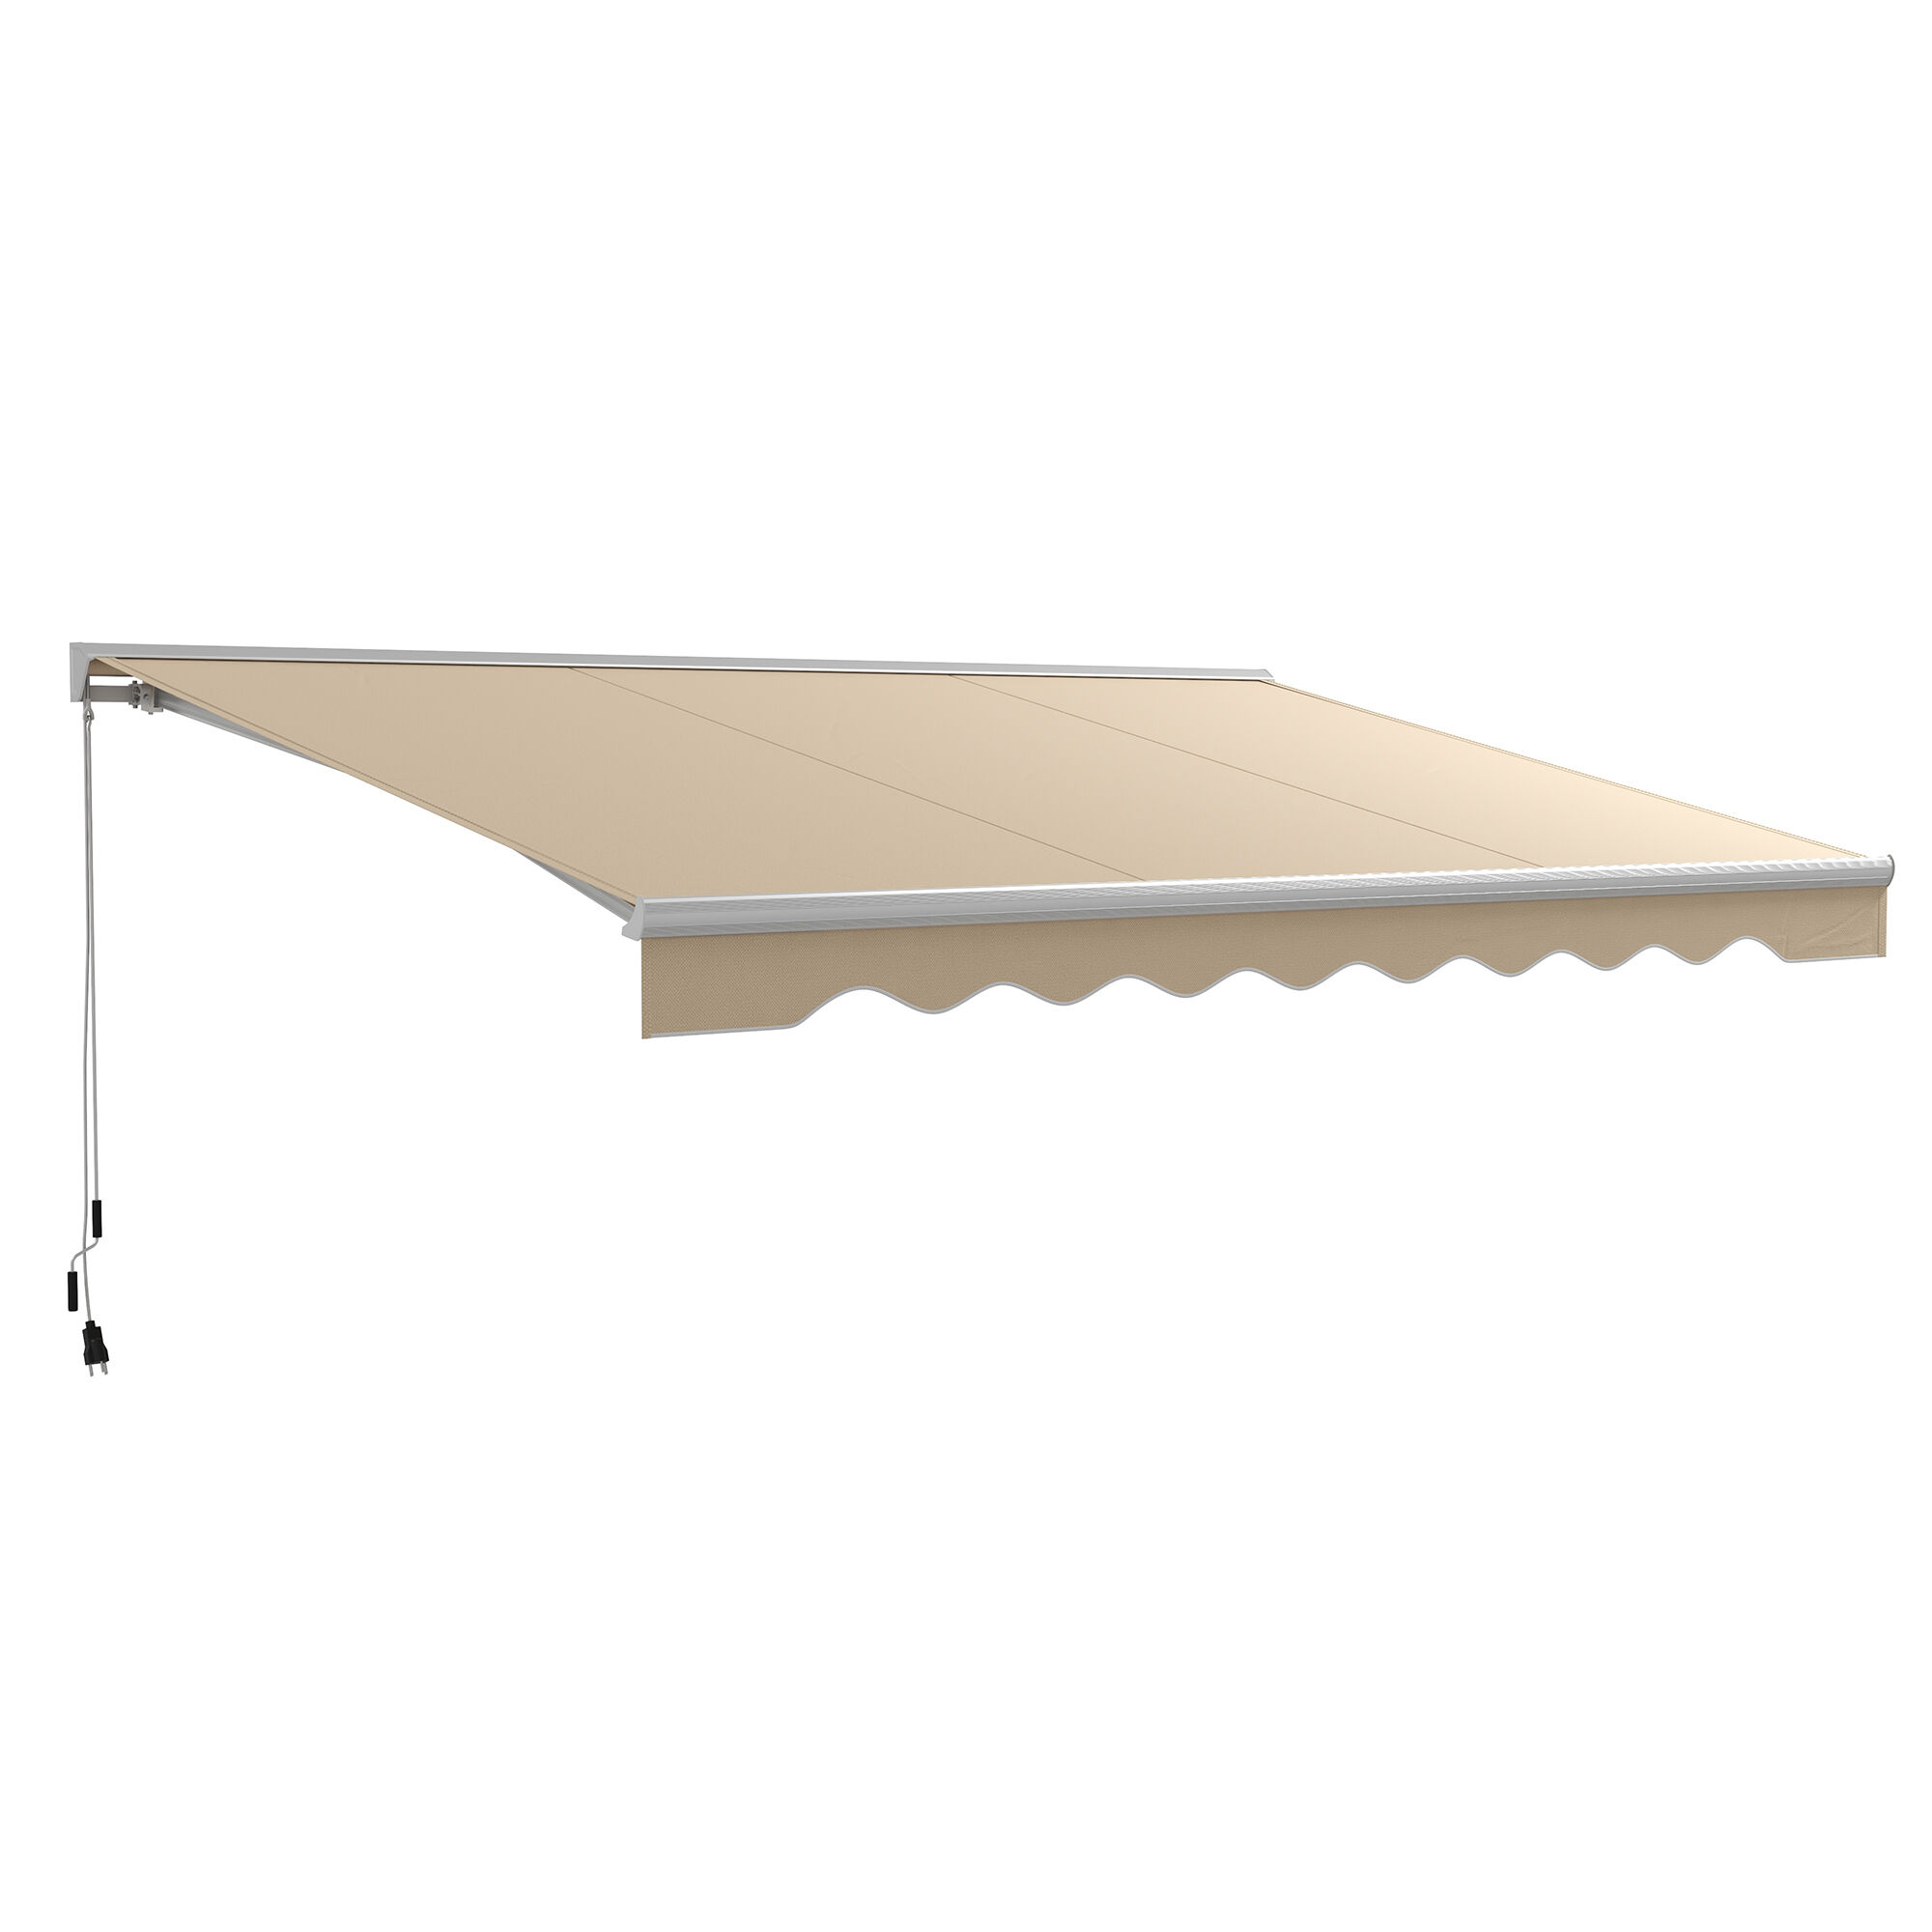 Outsunny Electric Awning 16.5x10 with LED Remote Control for Outdoor Patio Cream White   Aosom.com